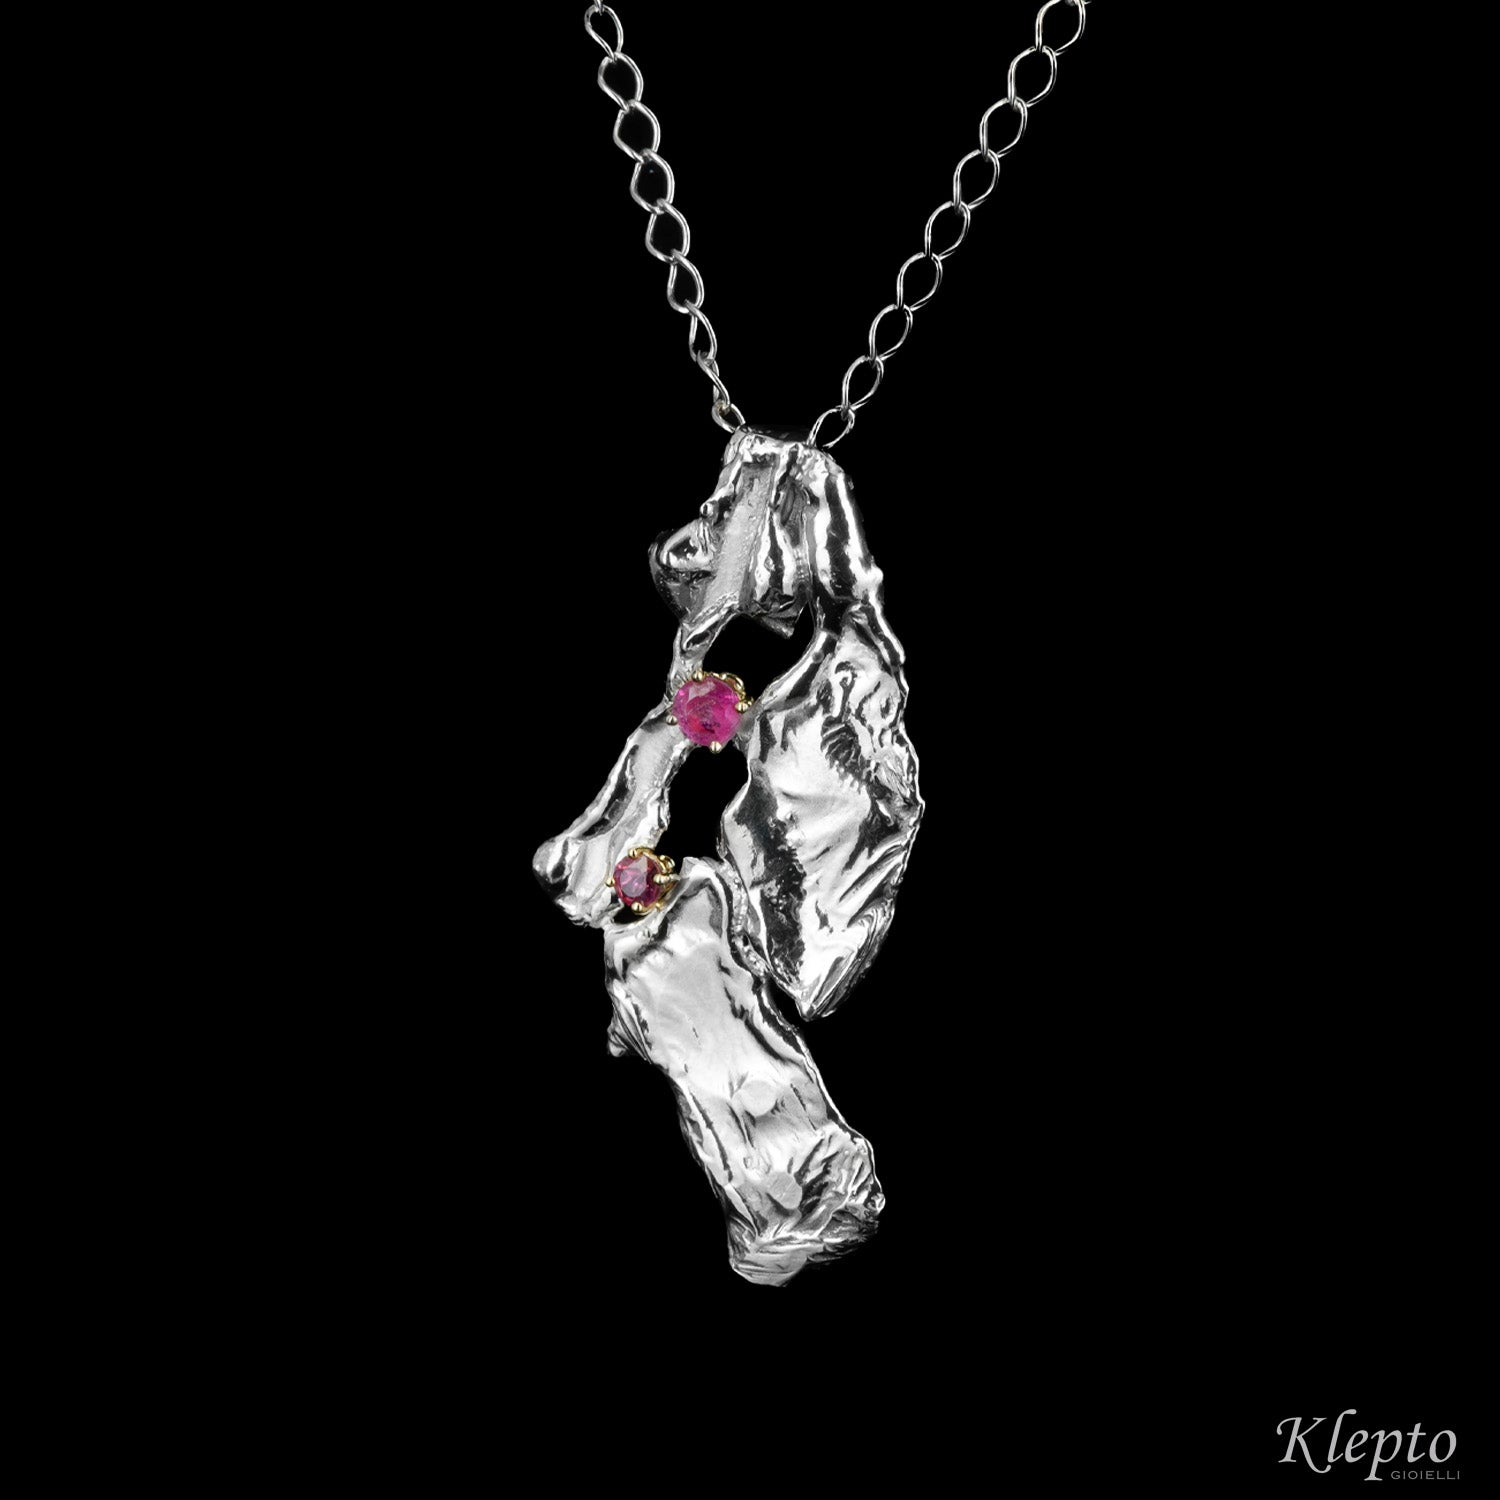 Pendant in Silnova® Silver and yellow gold with pink Tourmaline and Rhodolite